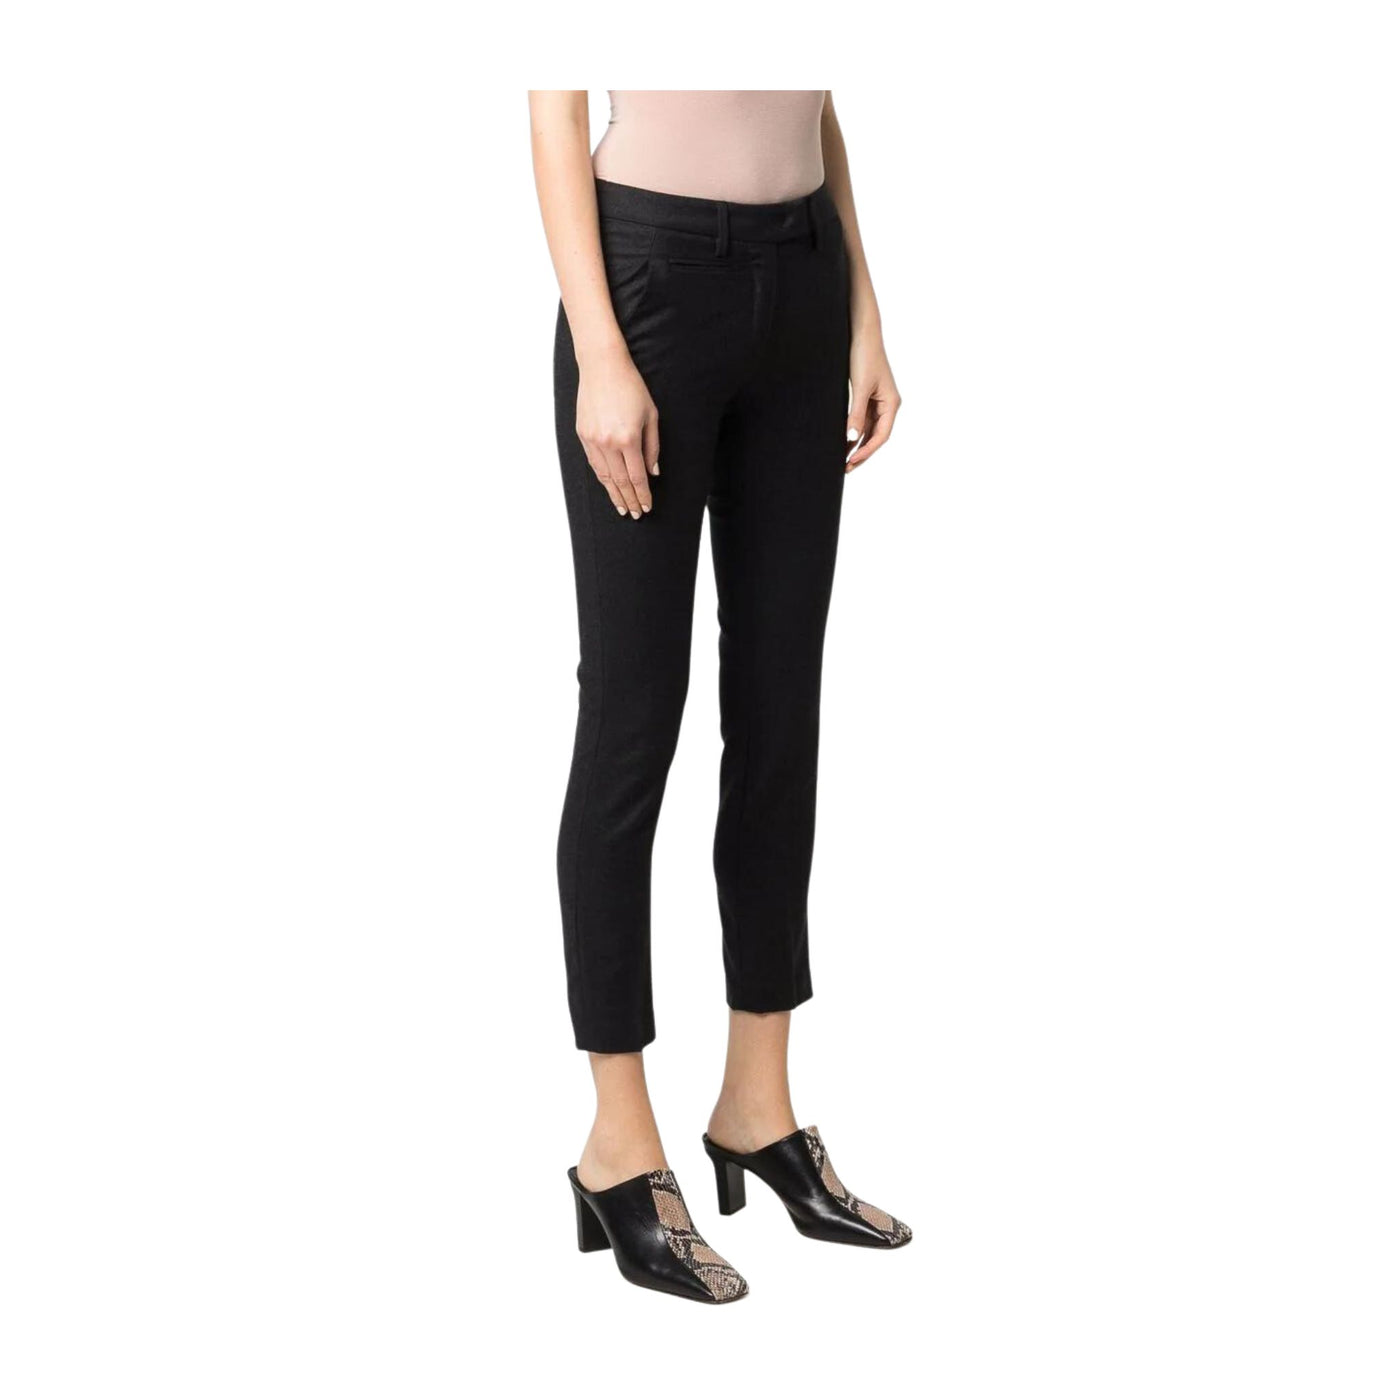 Women's elastic cropped trousers